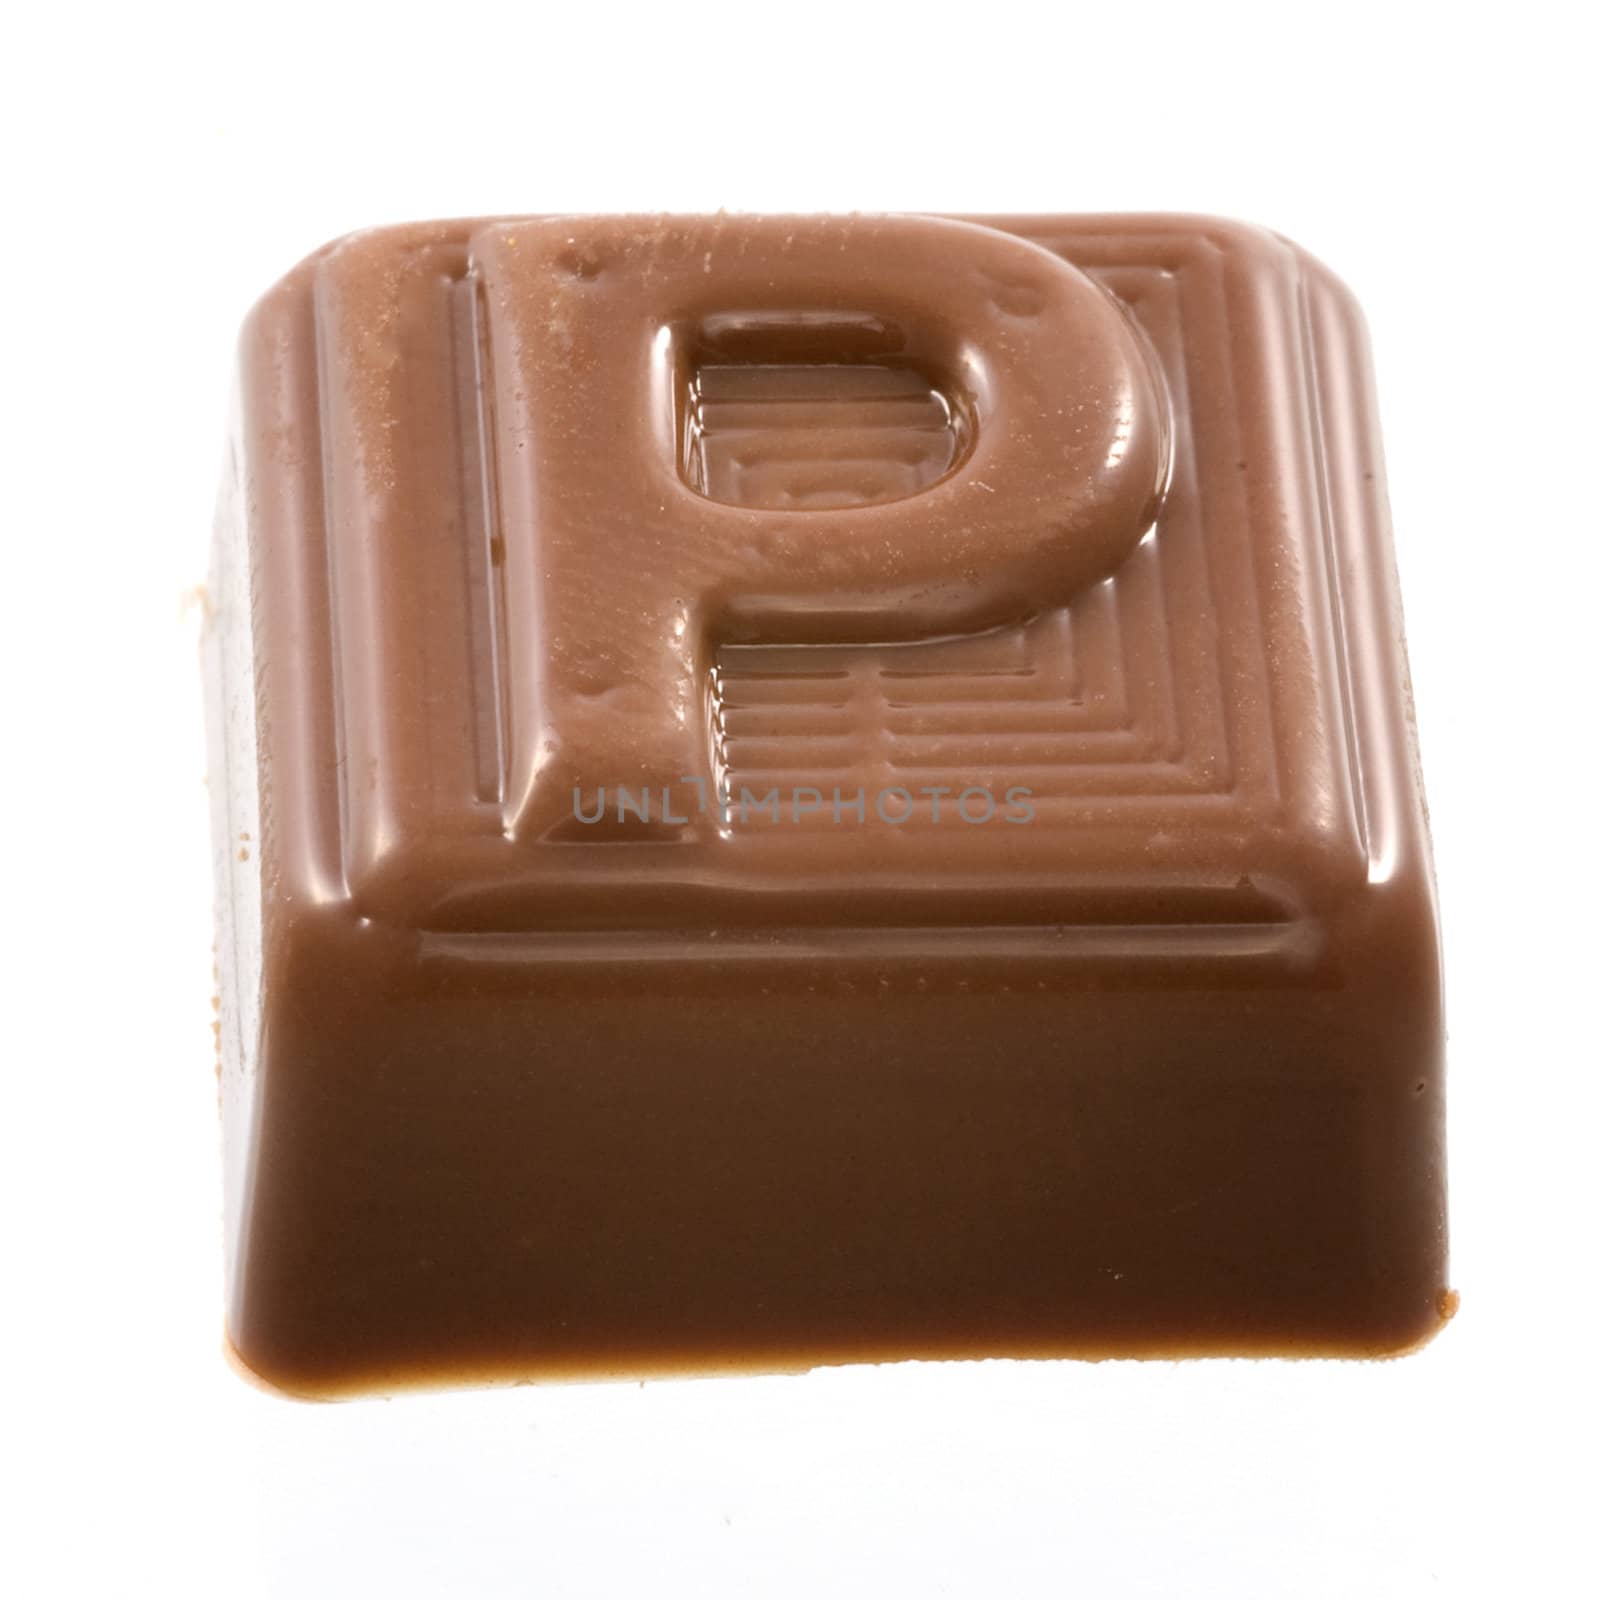 The chocolate letter "P"